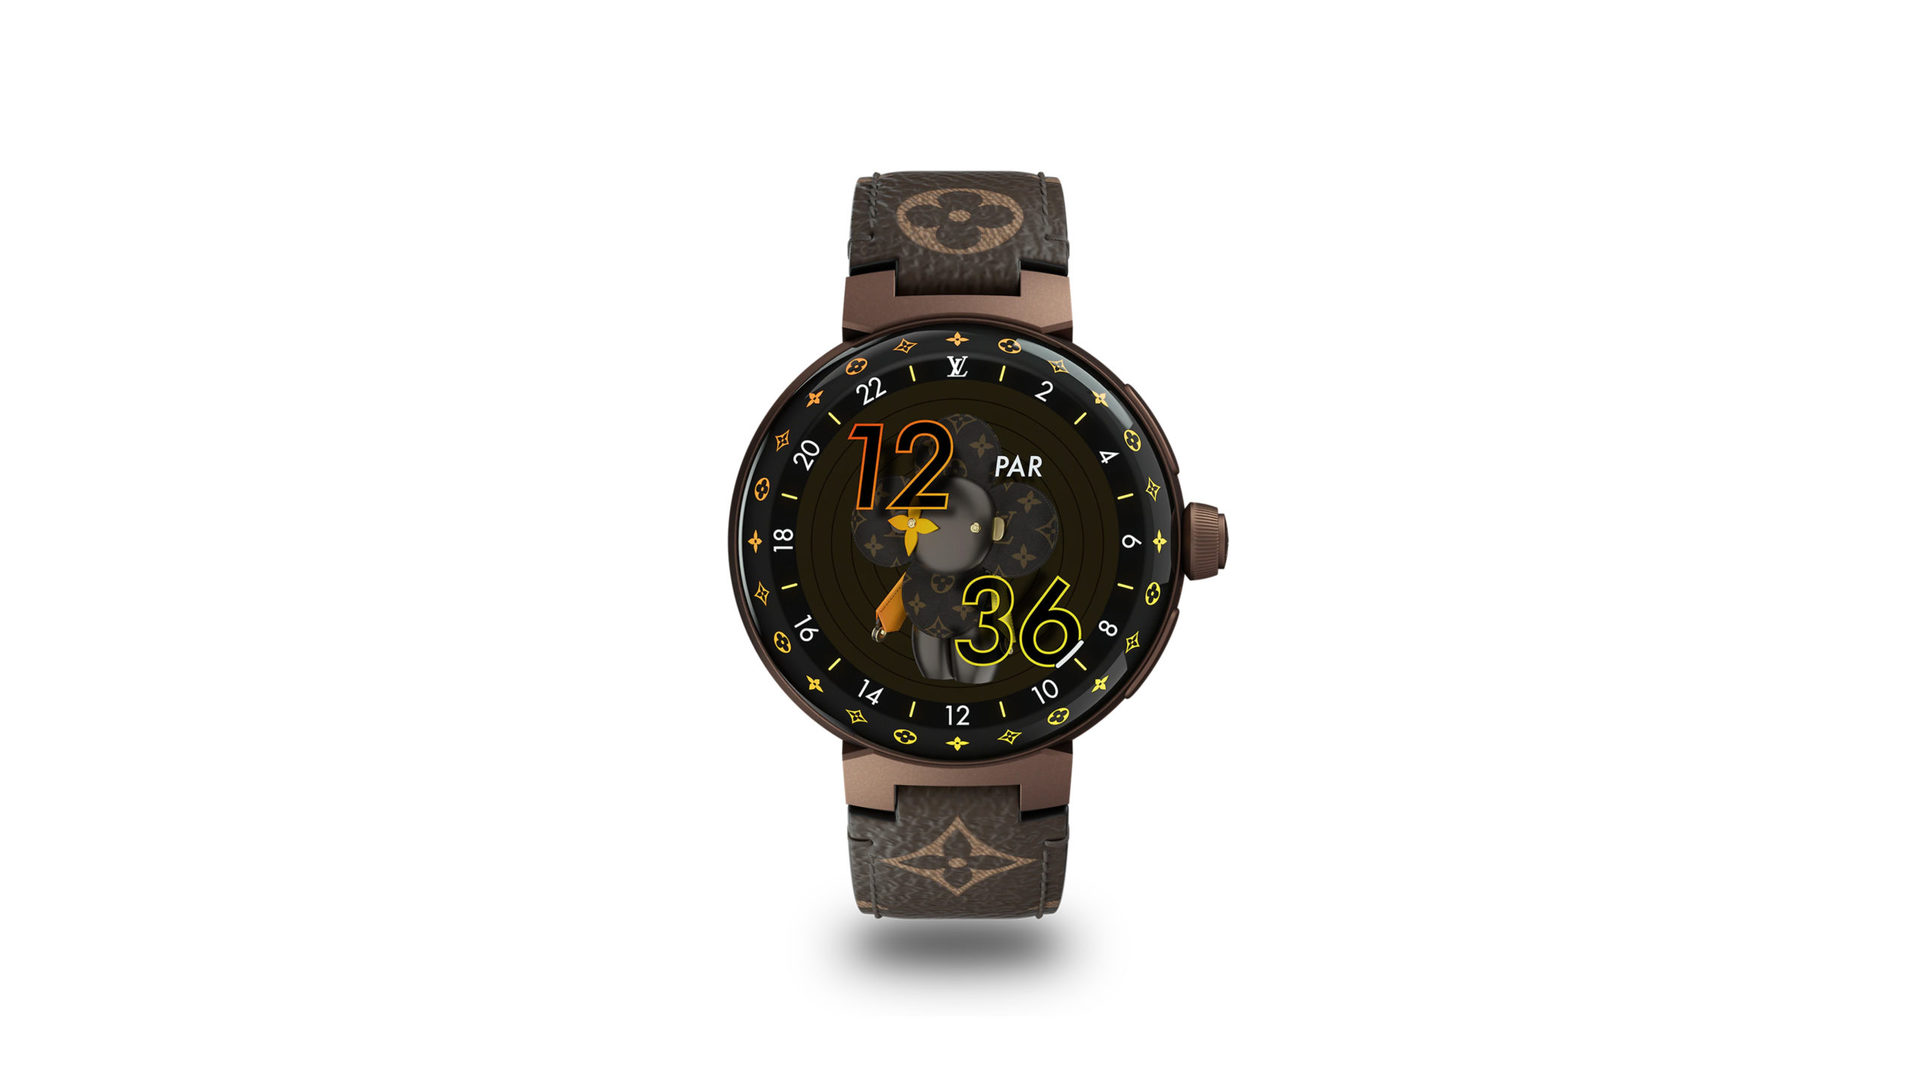 The Louis Vuitton Tambour Horizon Light Up depicts the LED functionality on this luxury smartwatch.